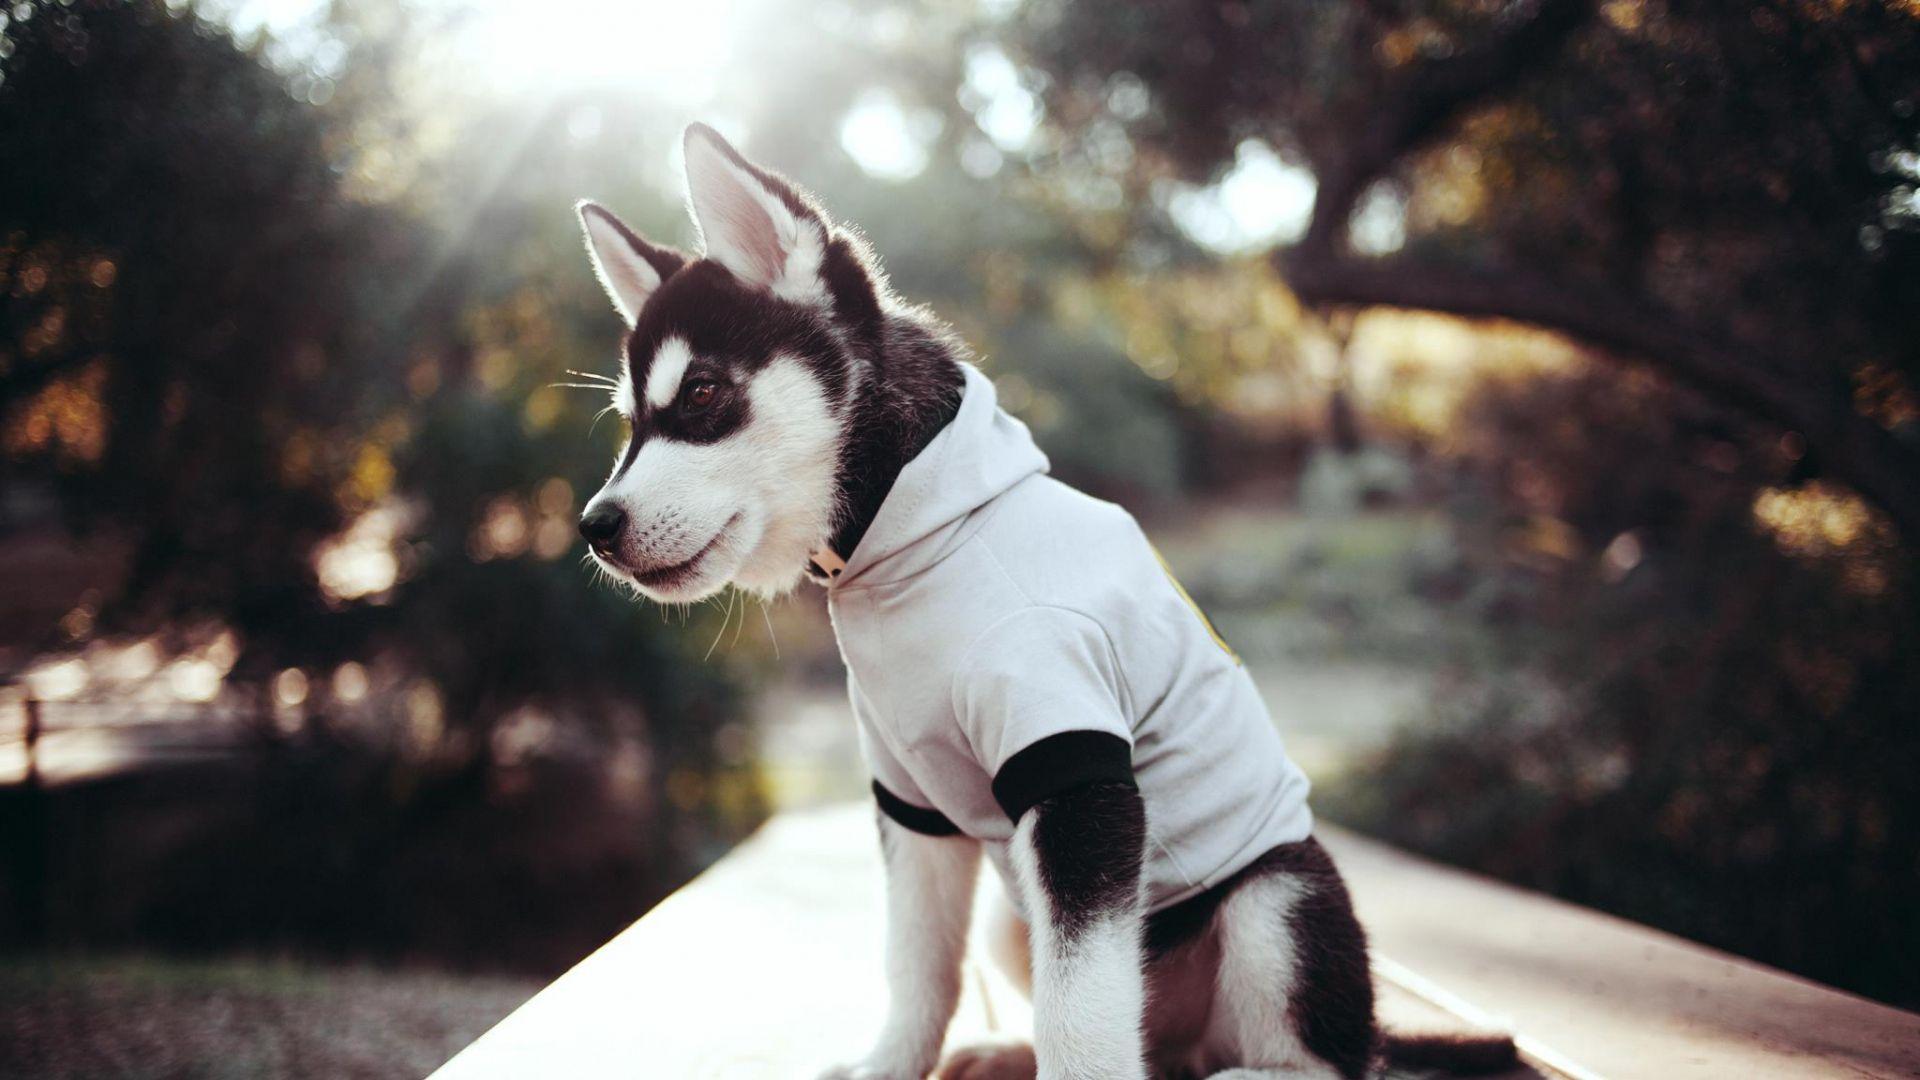 Download Wallpaper 1920x1080 Husky, Puppy, Clothing, Muzzle Full